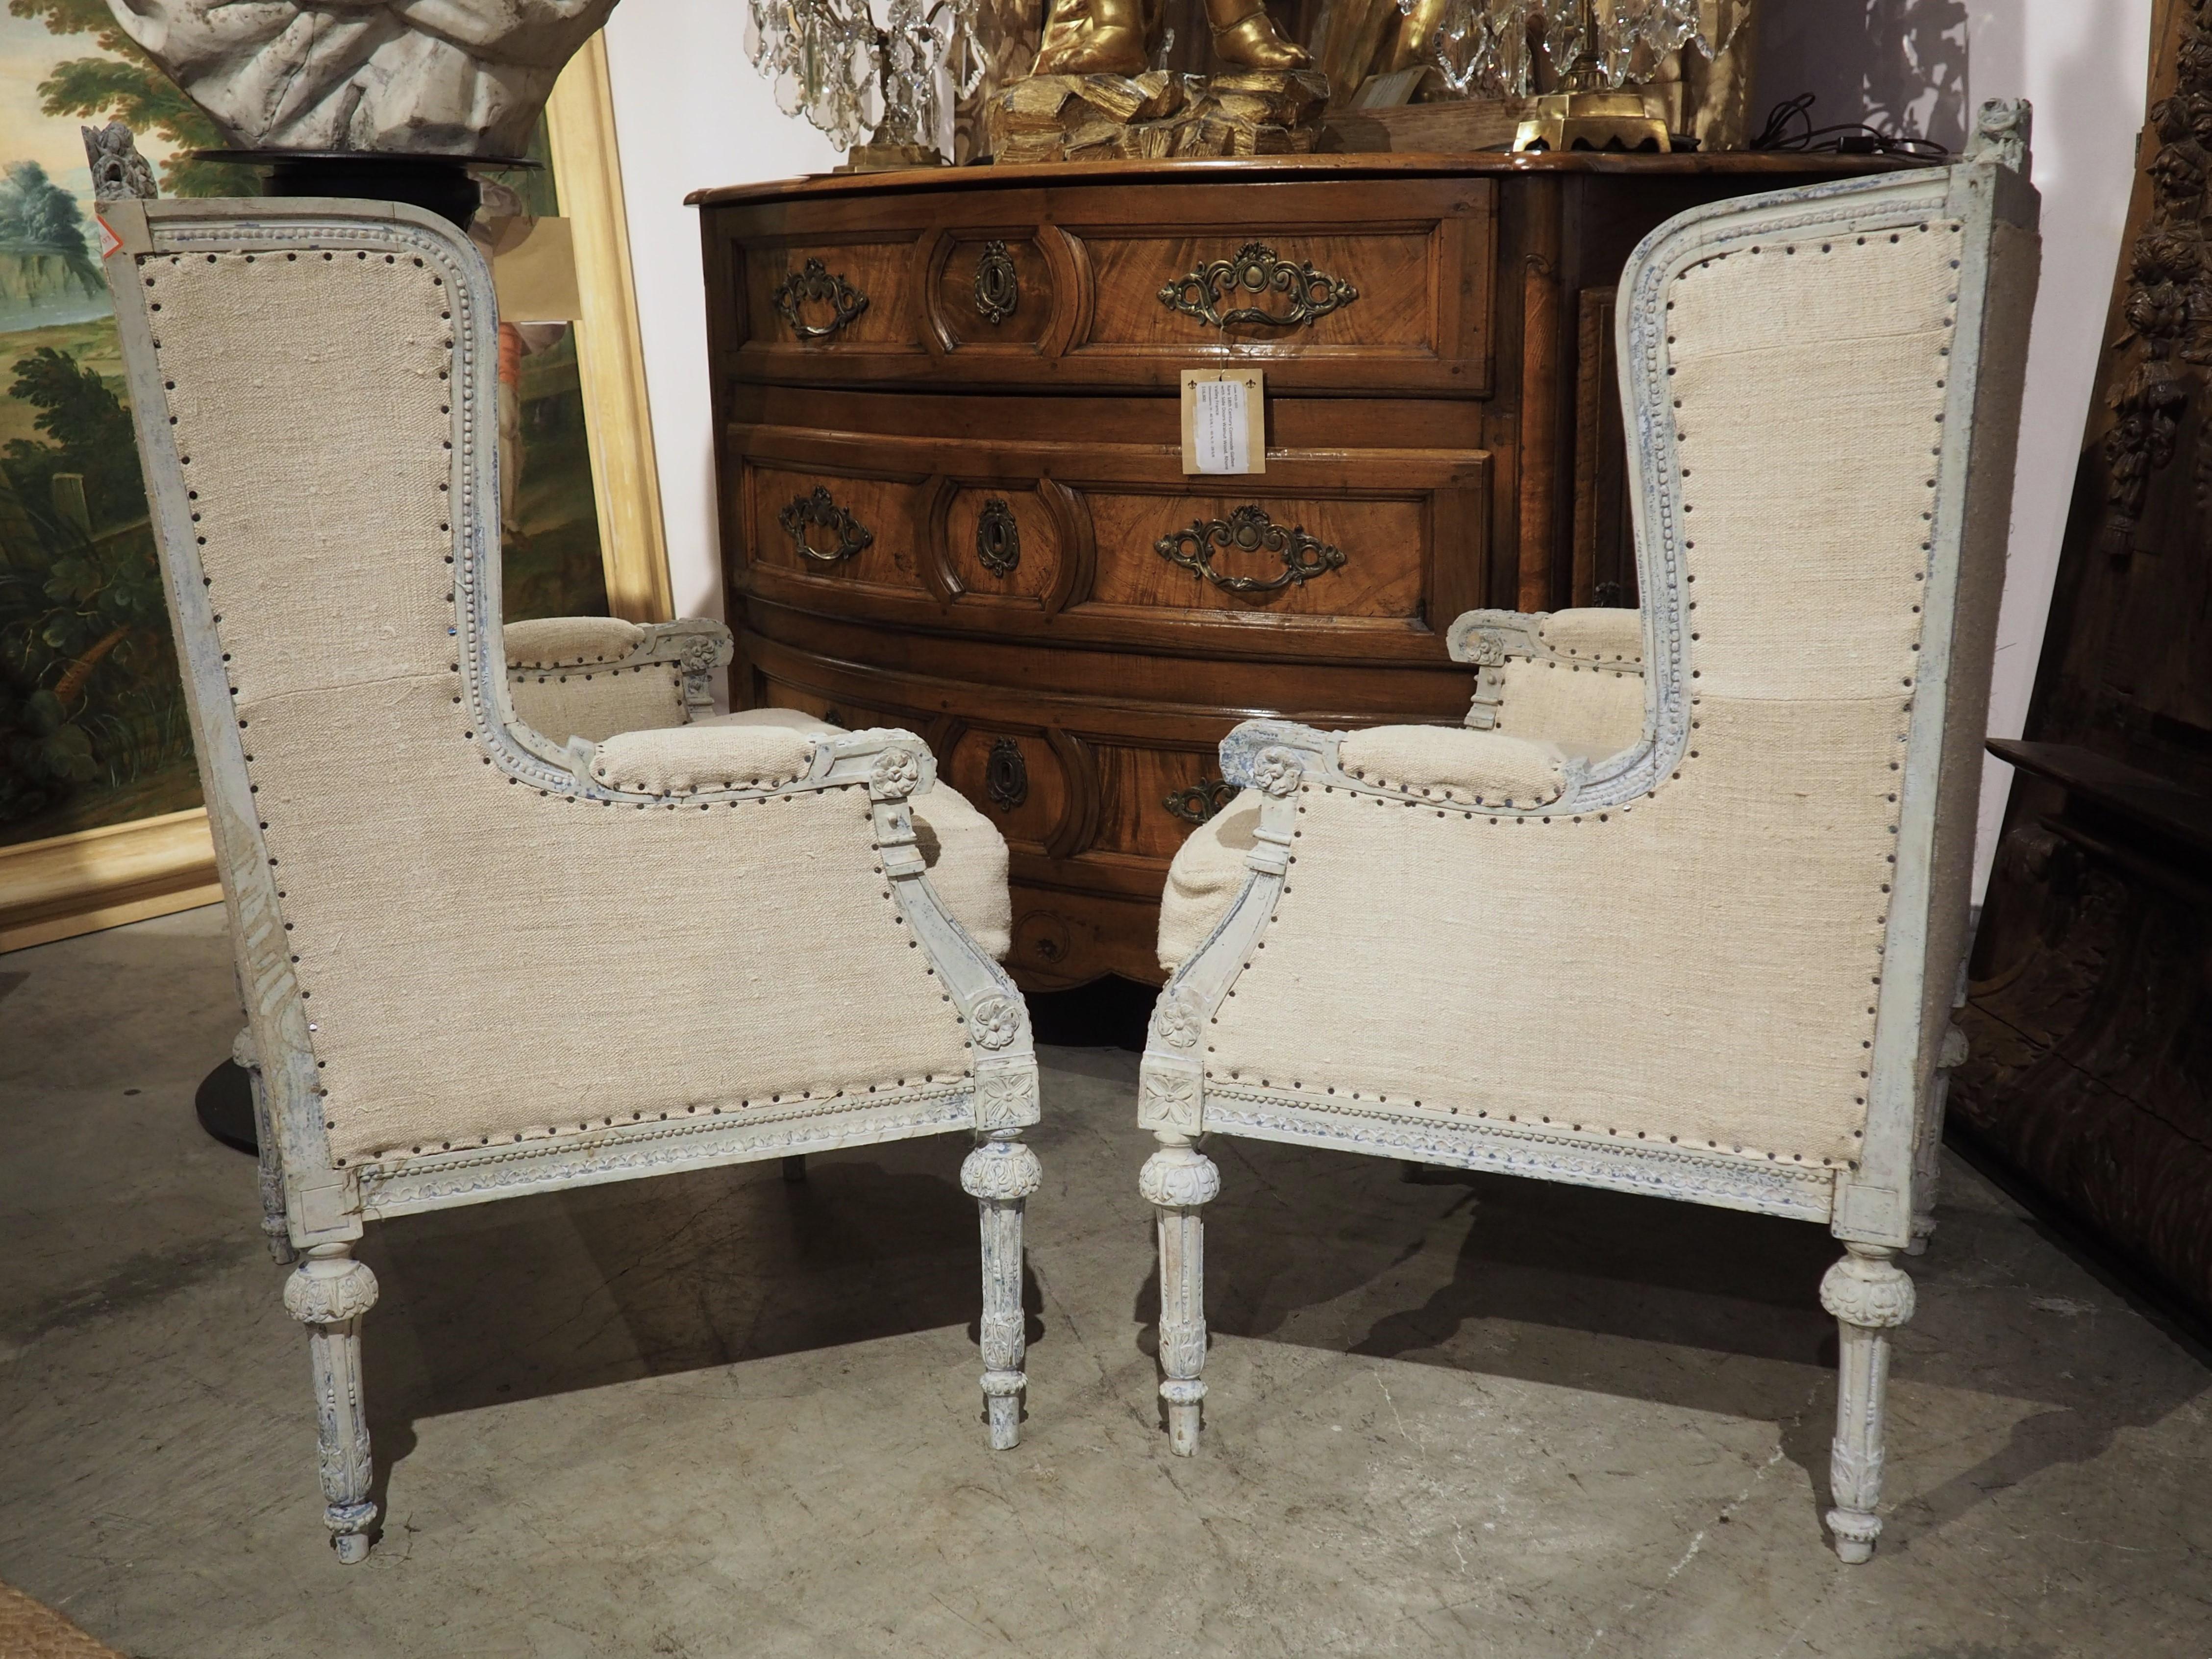 Pair of Painted 19th C. French Louis XVI Style Armchairs, 